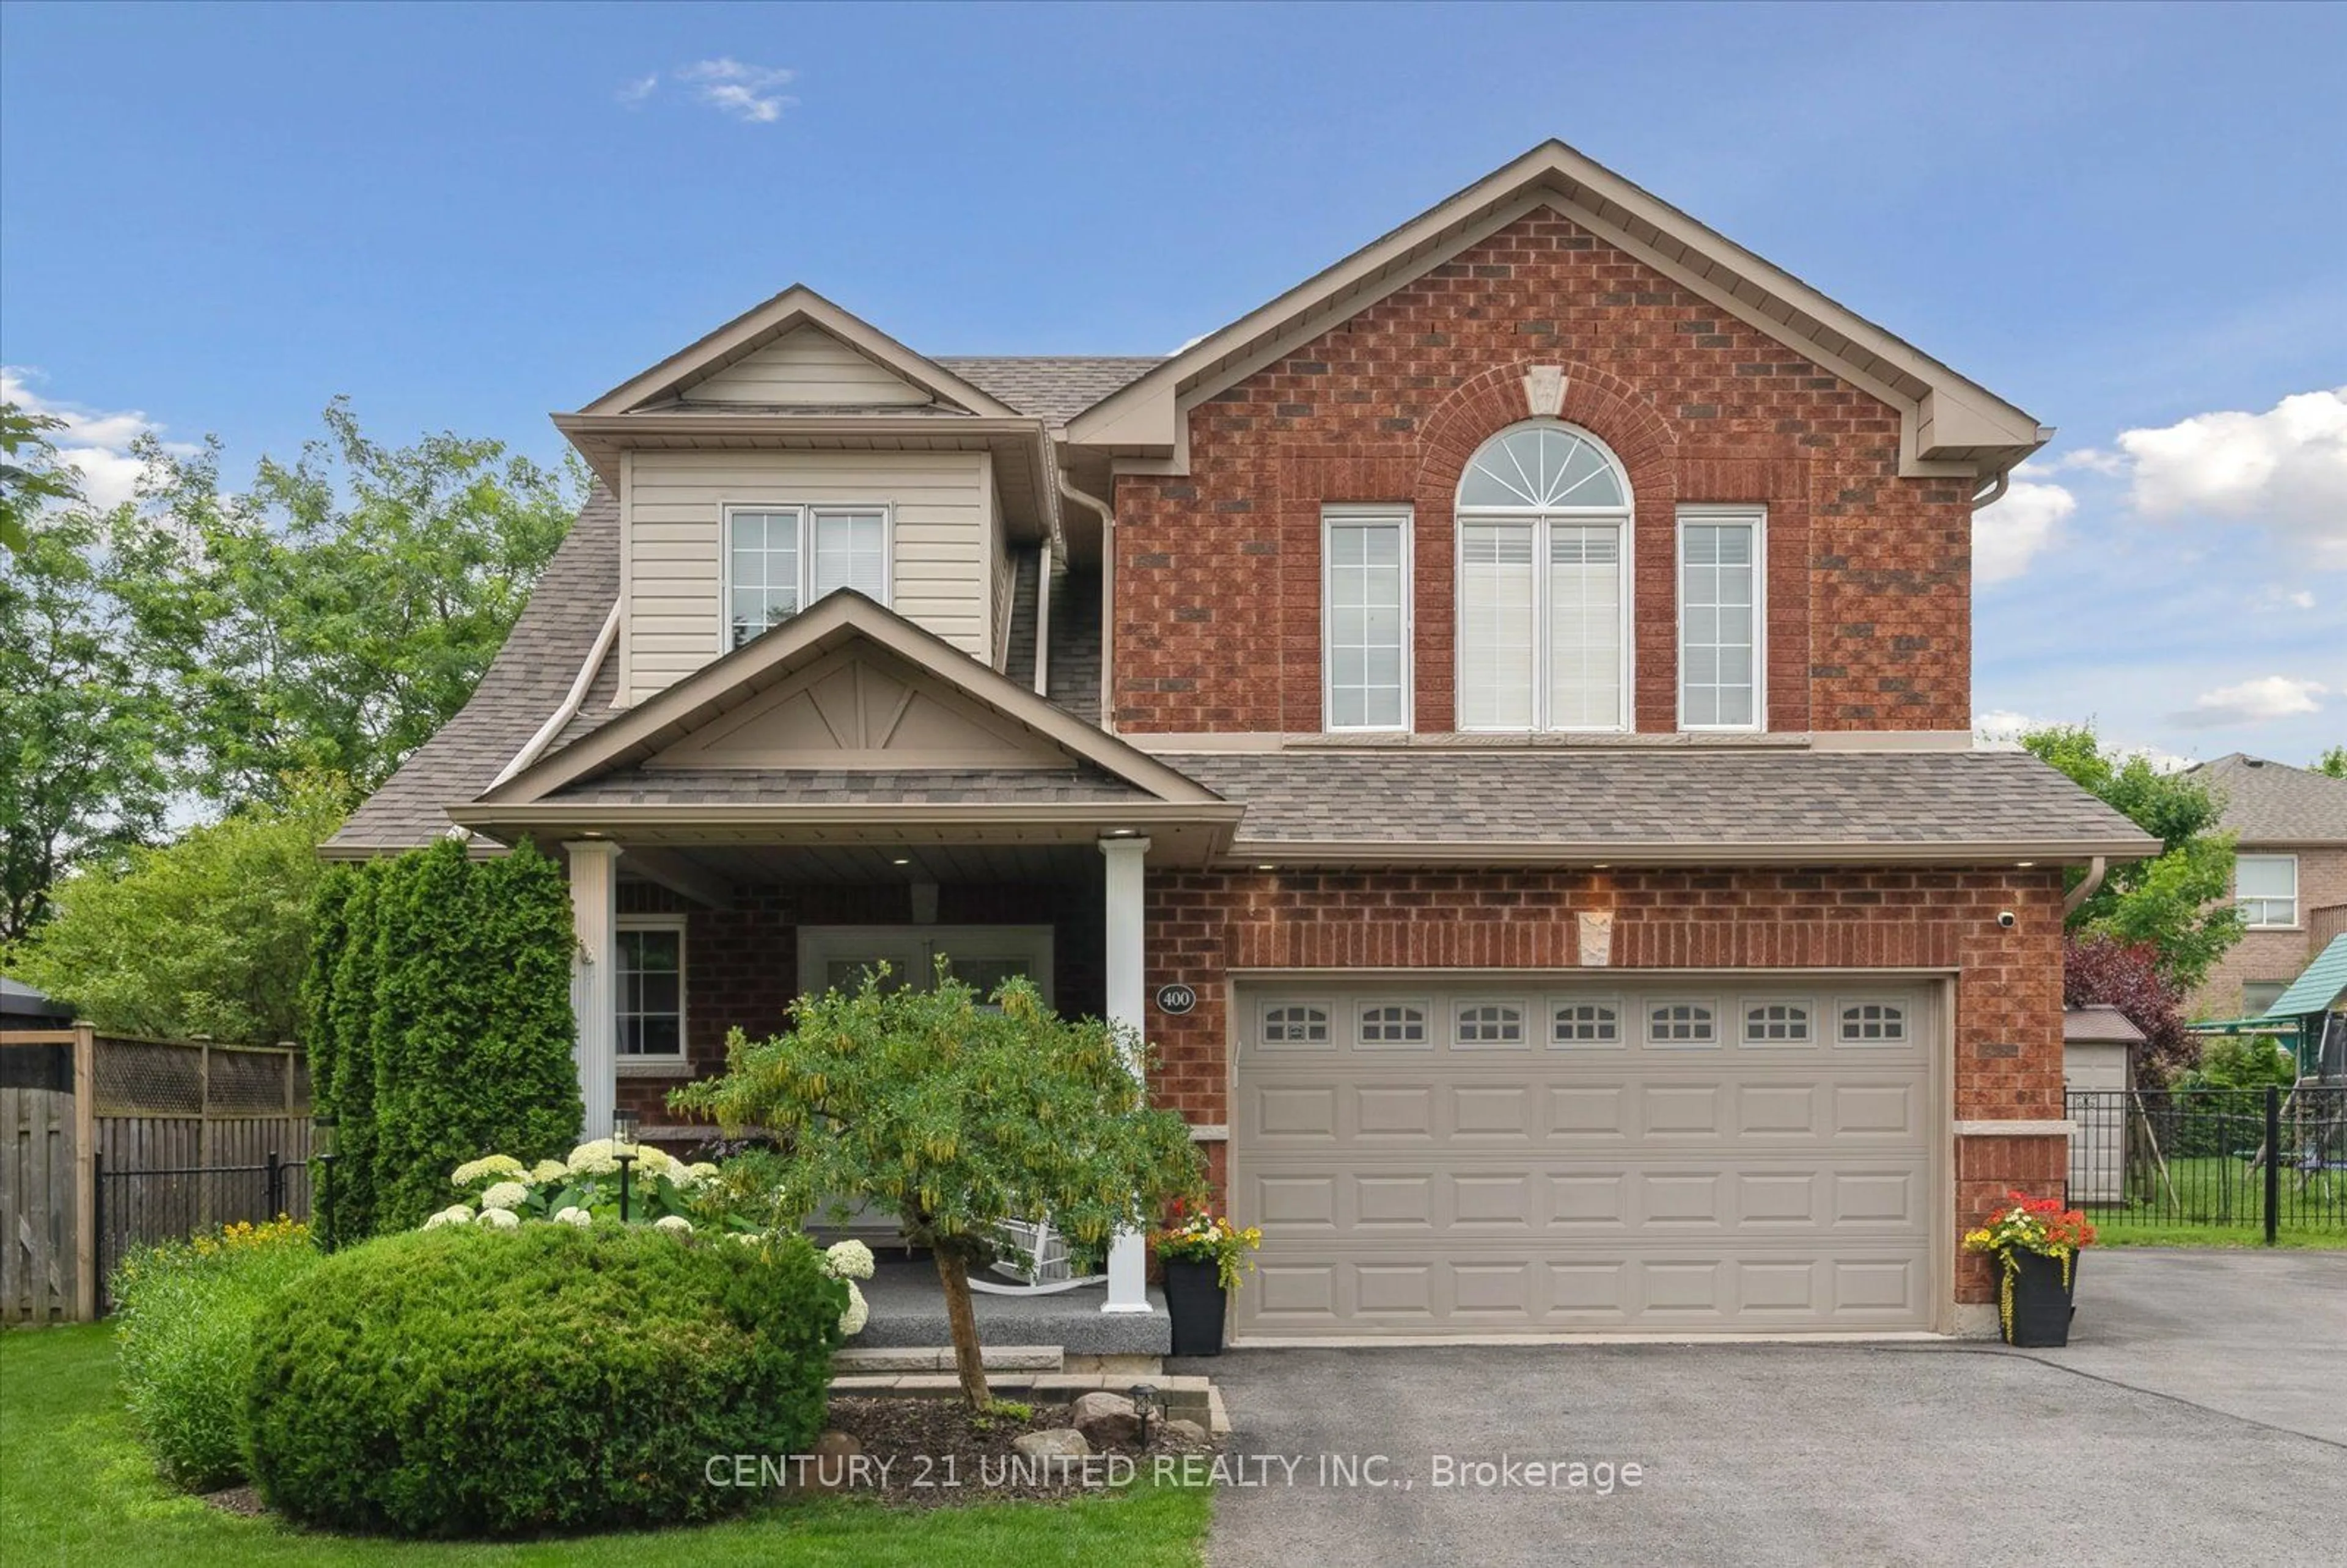 Home with brick exterior material for 400 Carriage Lane, Peterborough Ontario K9L 2A5